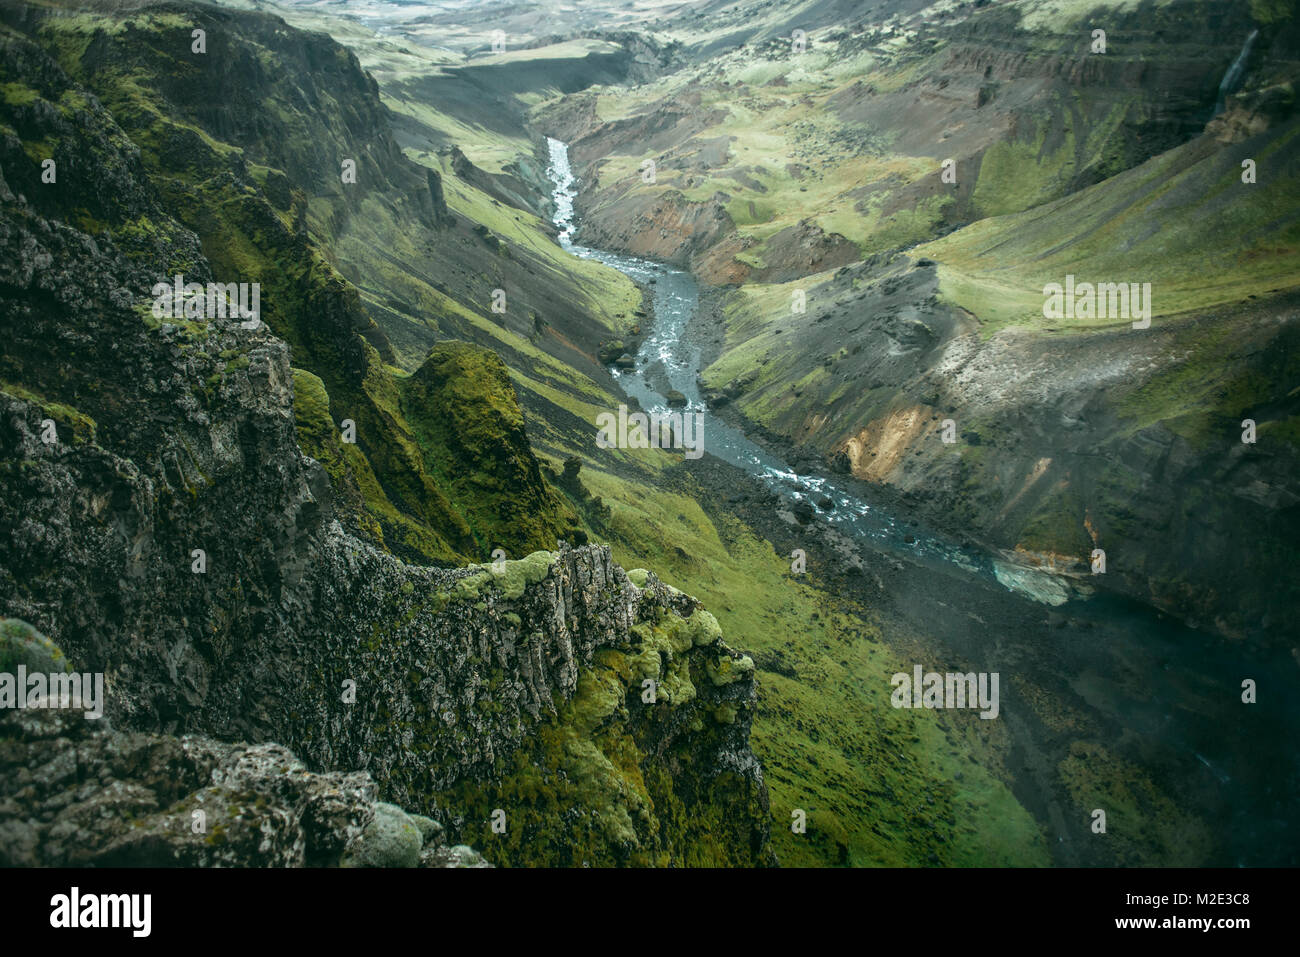 Scenic view of river in green valley Stock Photo